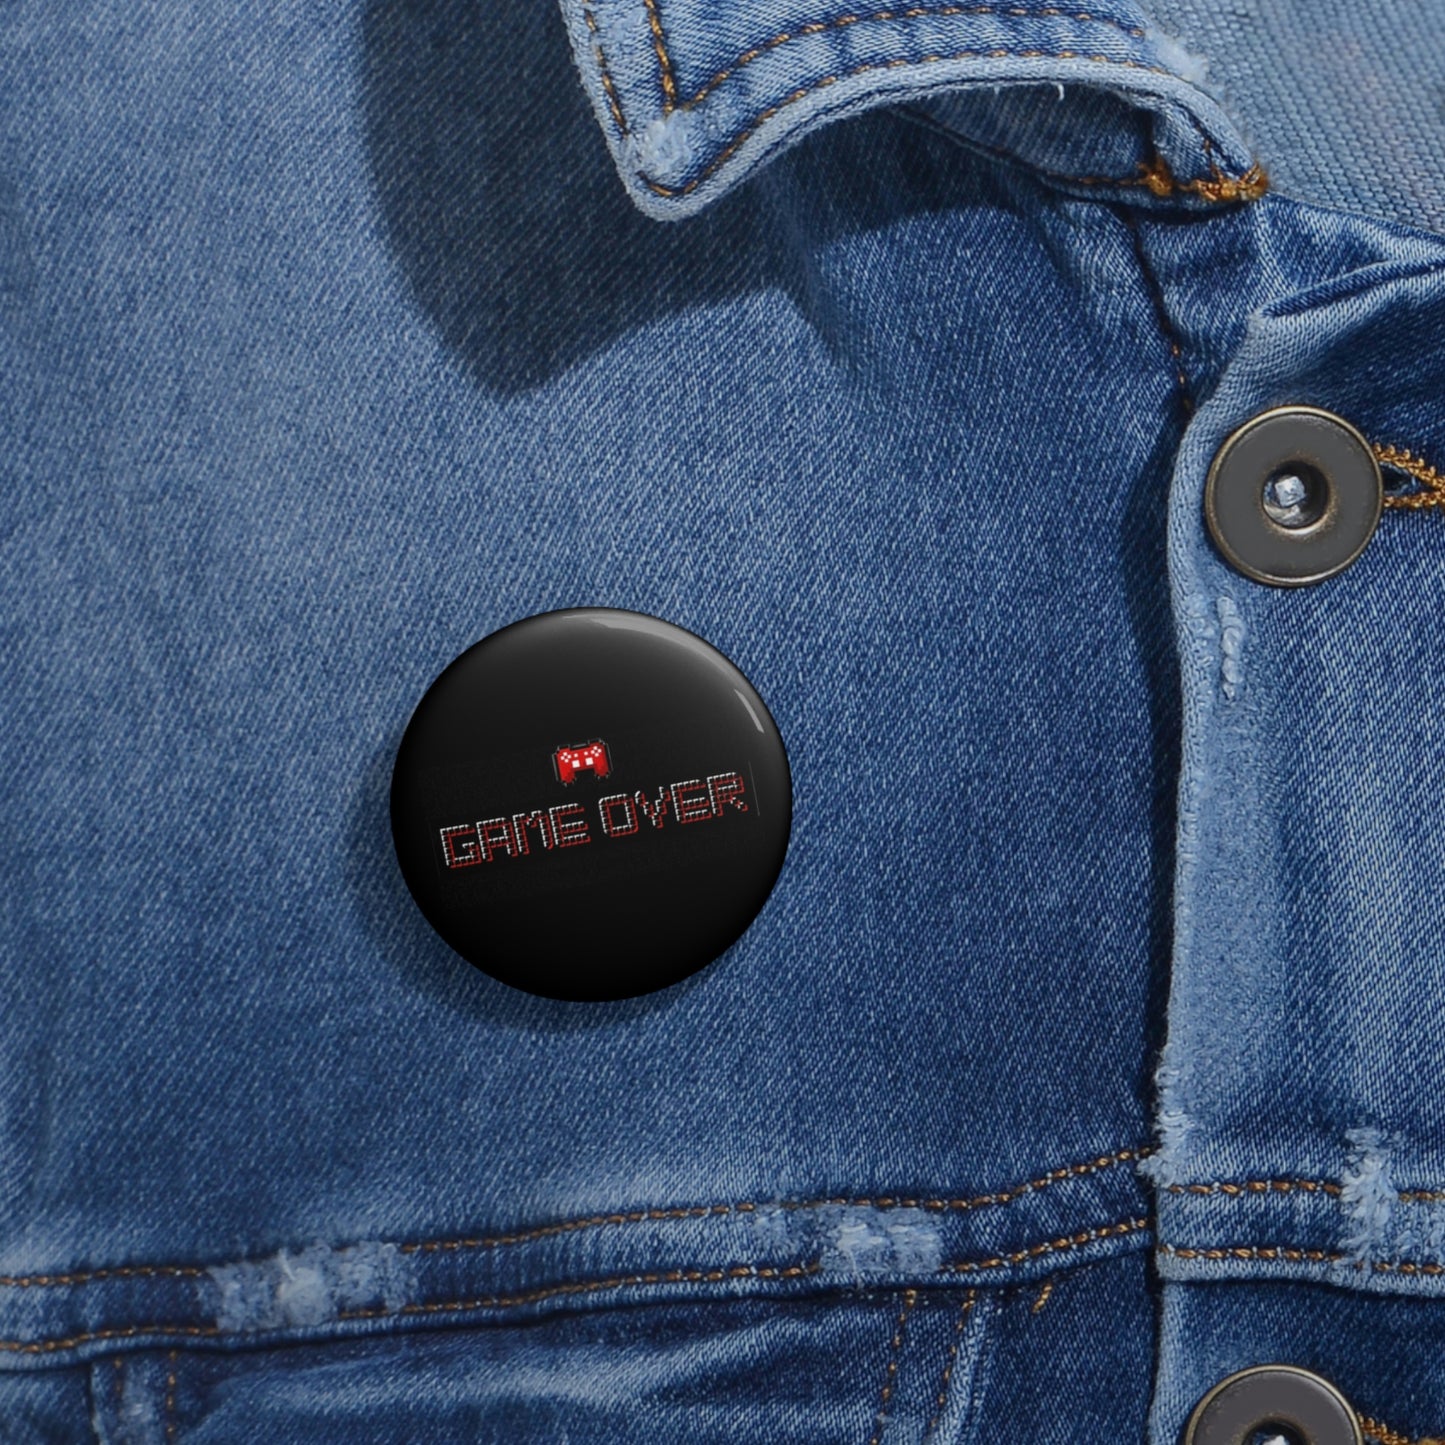 Game Over! Custom Pin Buttons